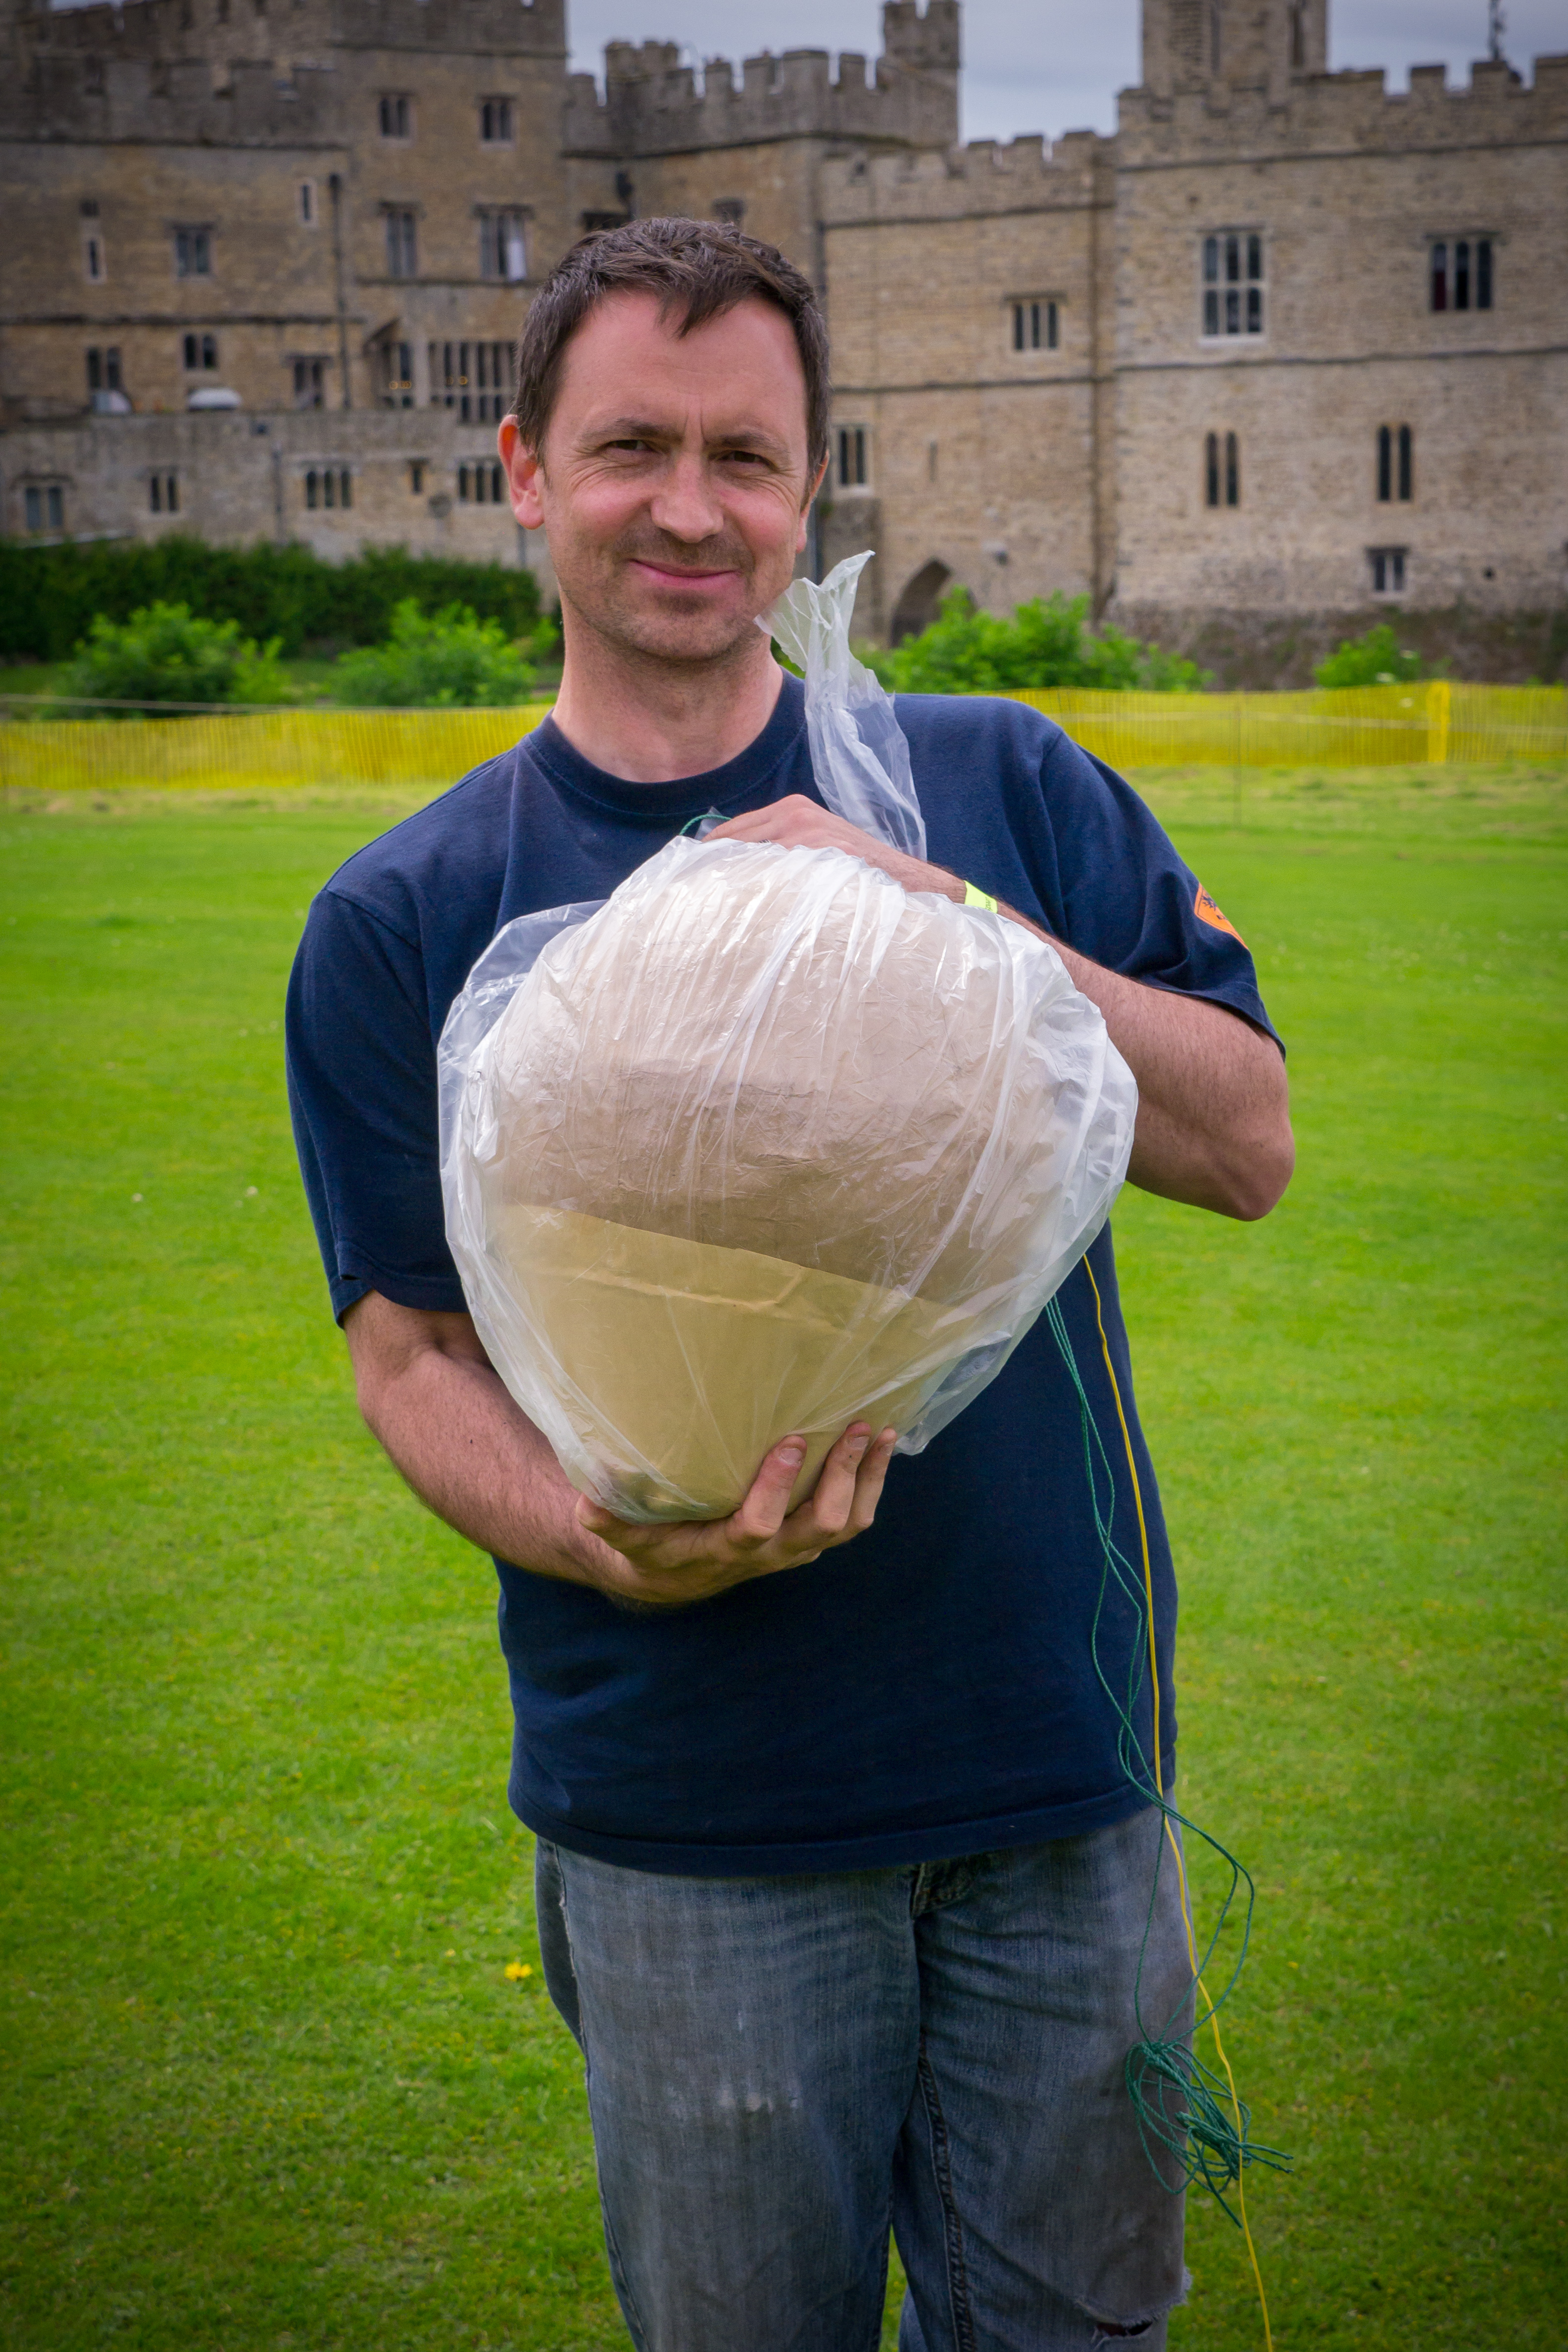 Alchemy Fireworks managing director holding a large firework shell at a classical concert where fireworks are choreographed to live music